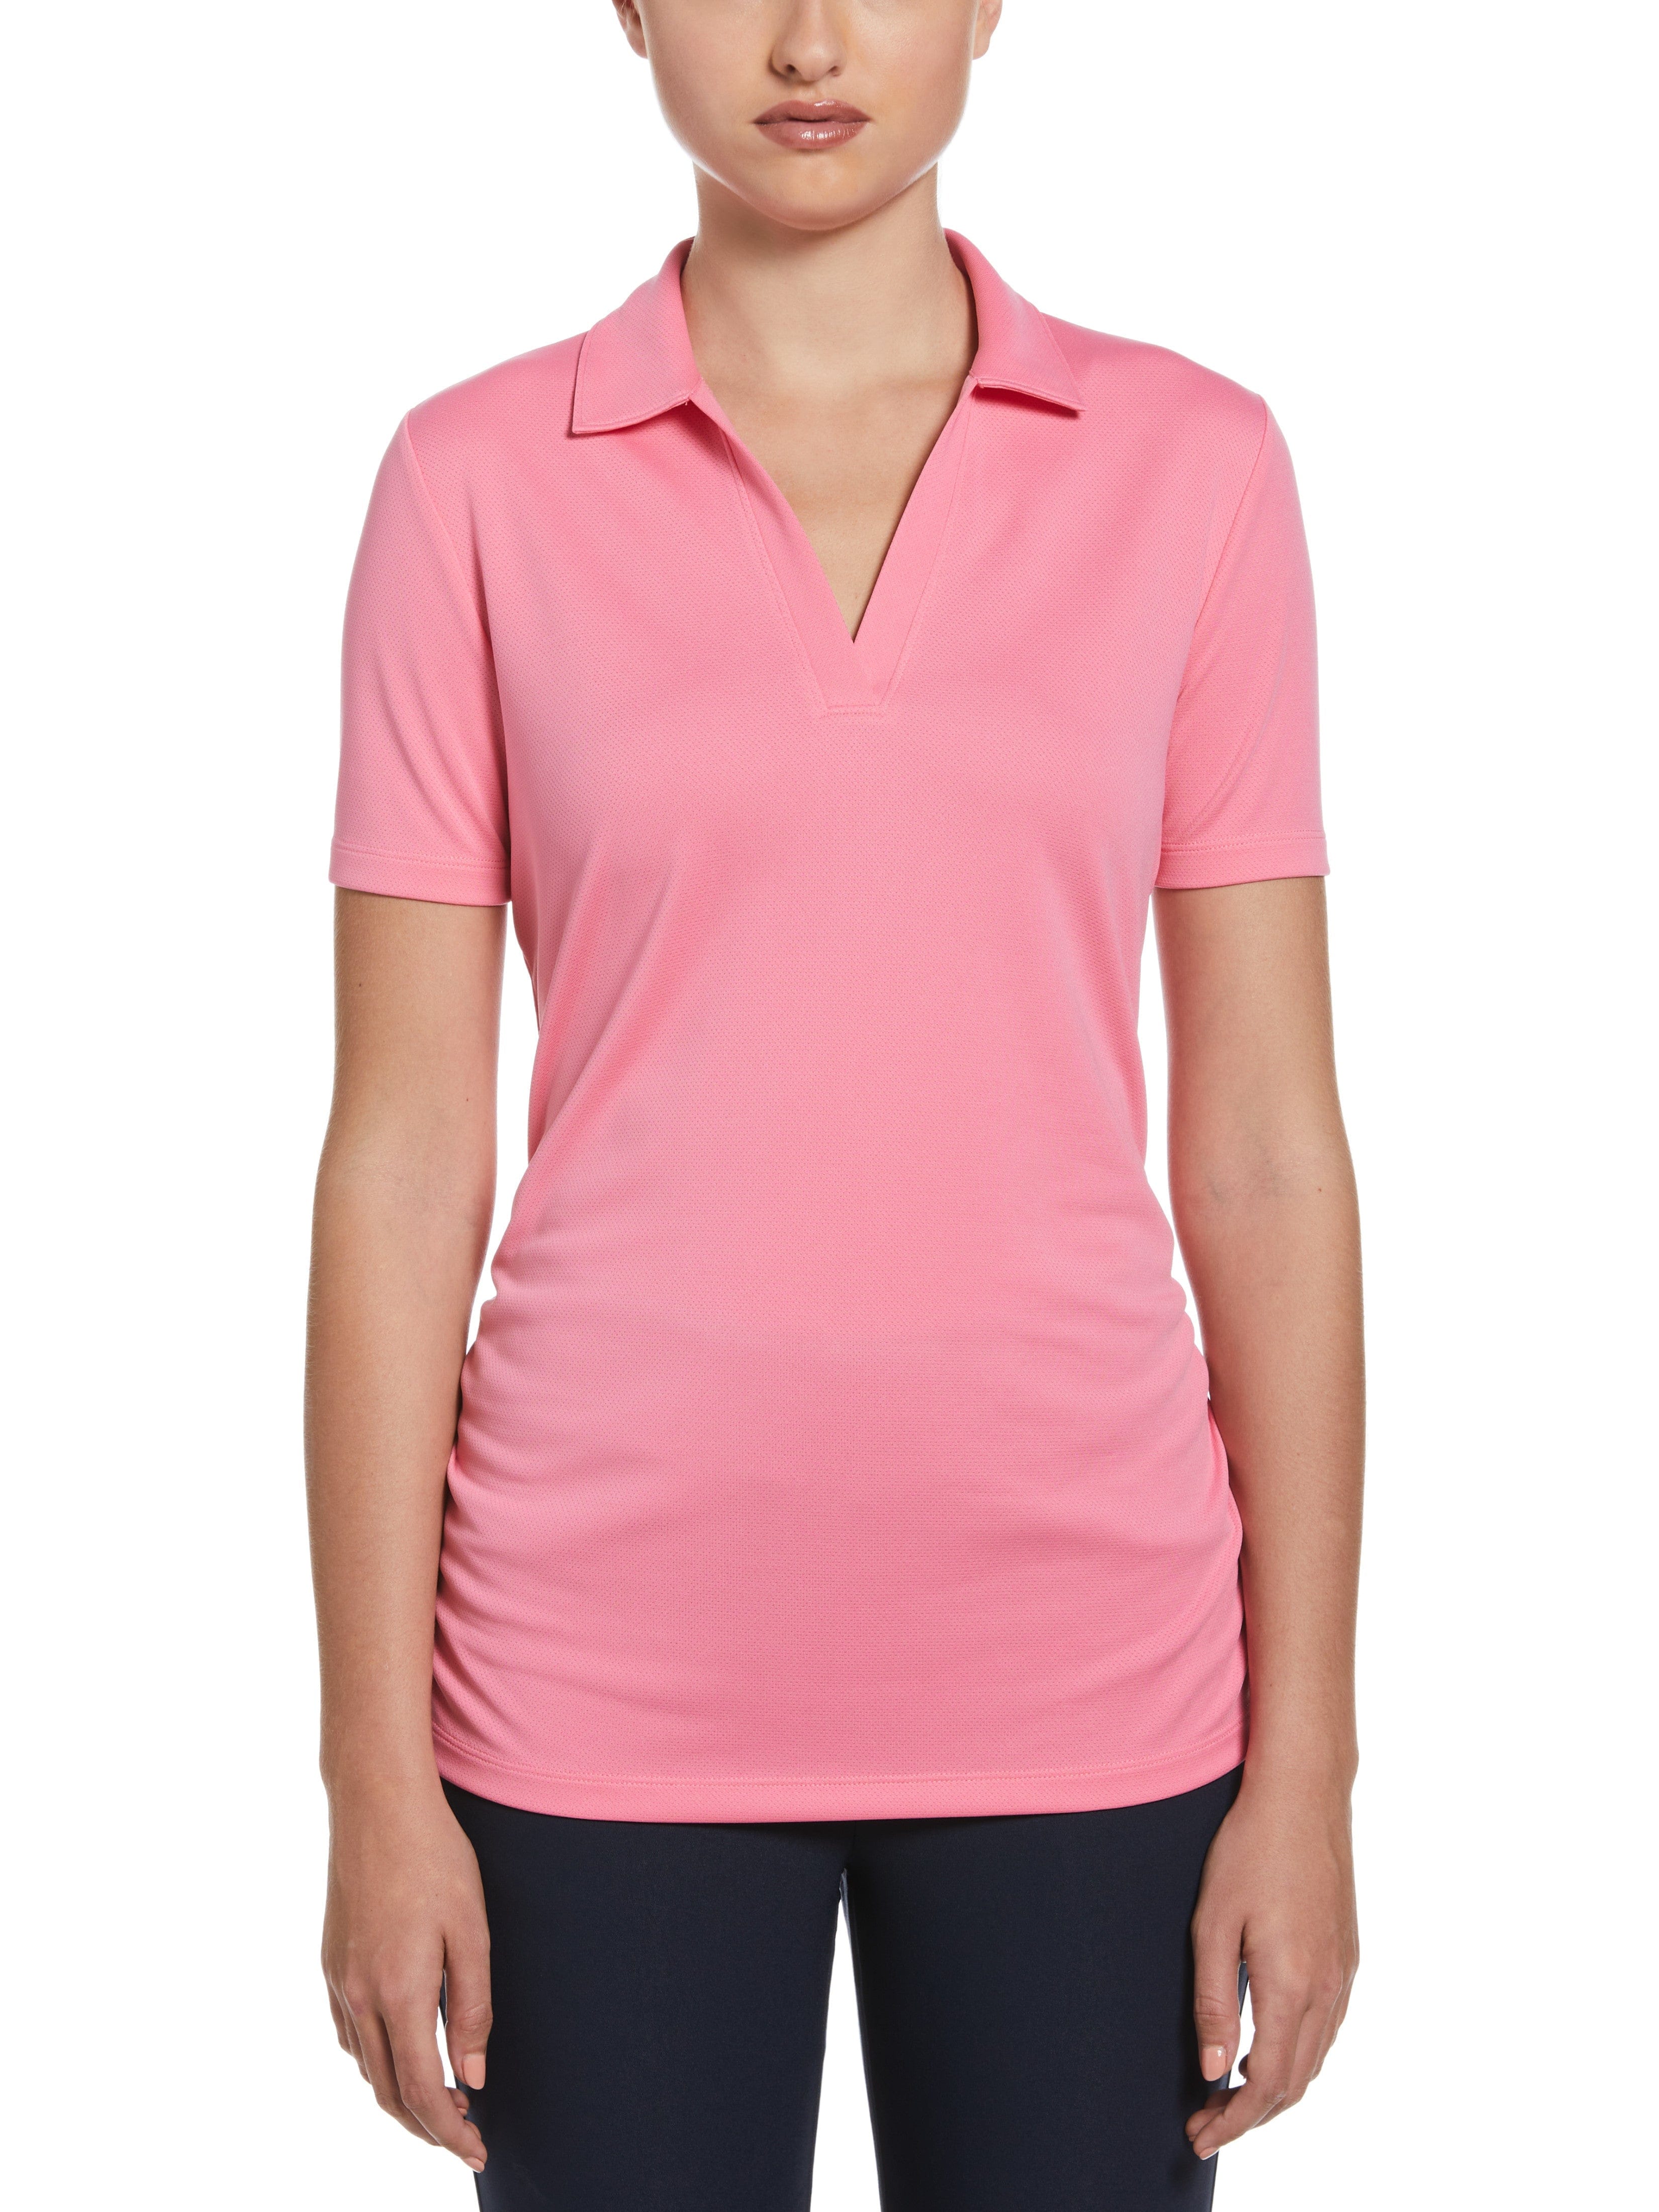 PGA TOUR Apparel Womens AirFlux™ Solid Golf Polo Shirt, Size Large, Flowering Ginger Pink, 100% Polyester | Golf Apparel Shop